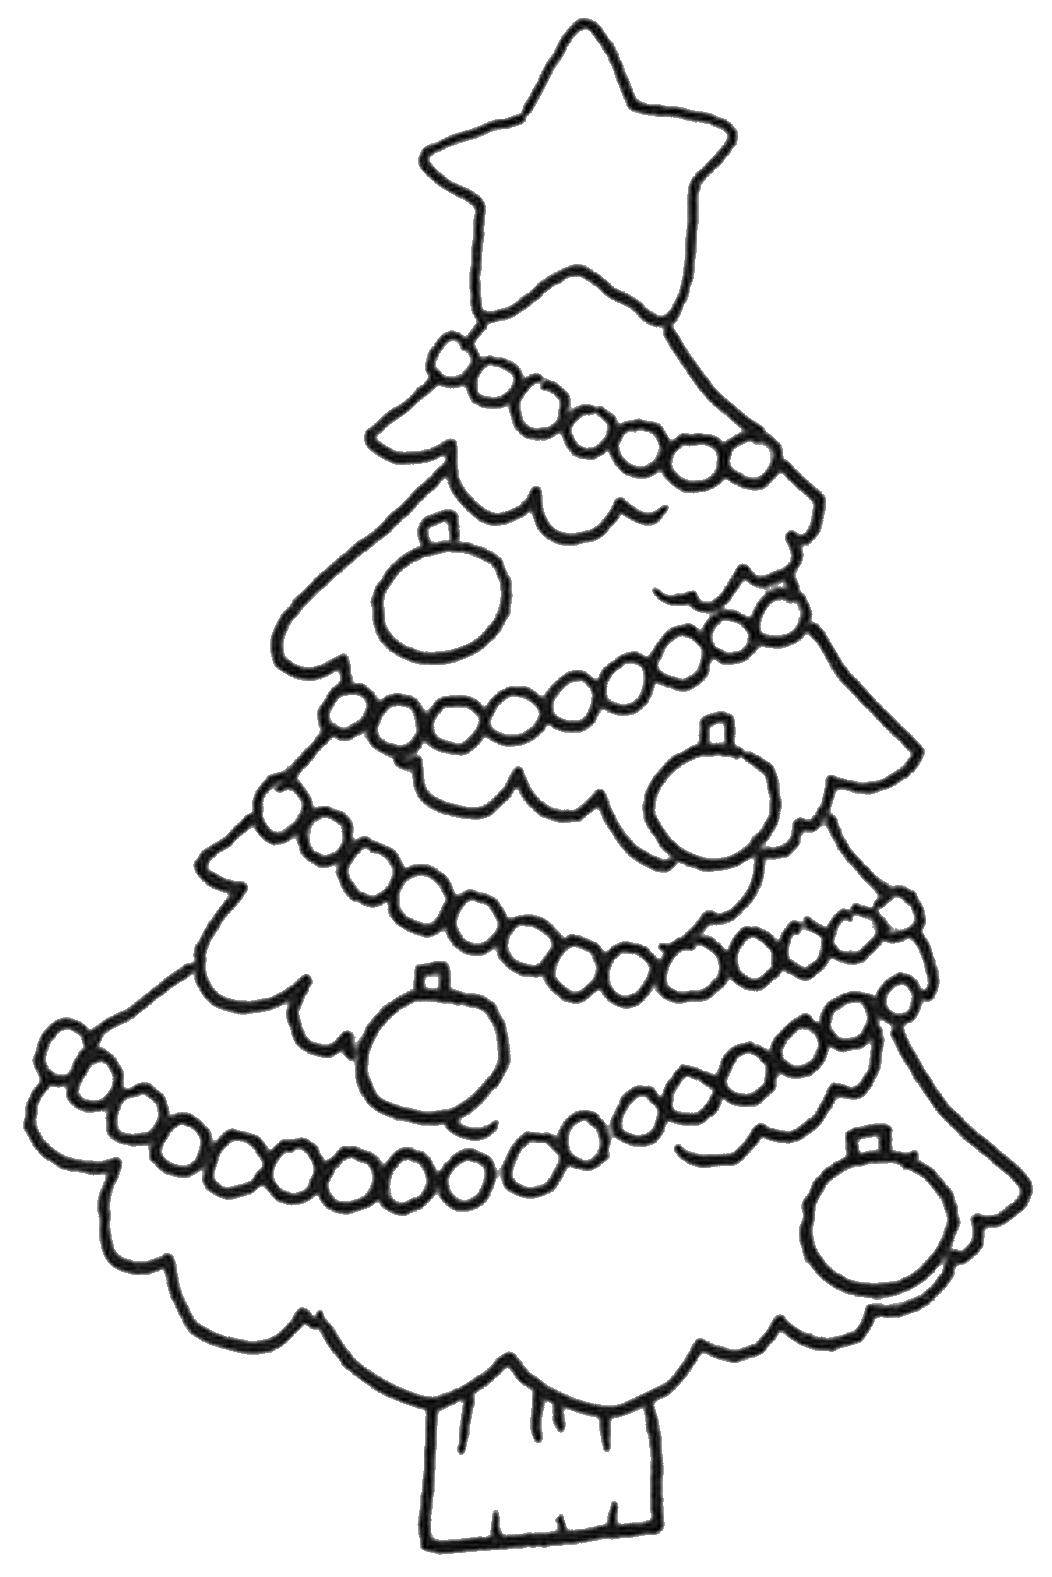 Coloring Tree with garlands. Category Christmas. Tags:  tree, toys, star.